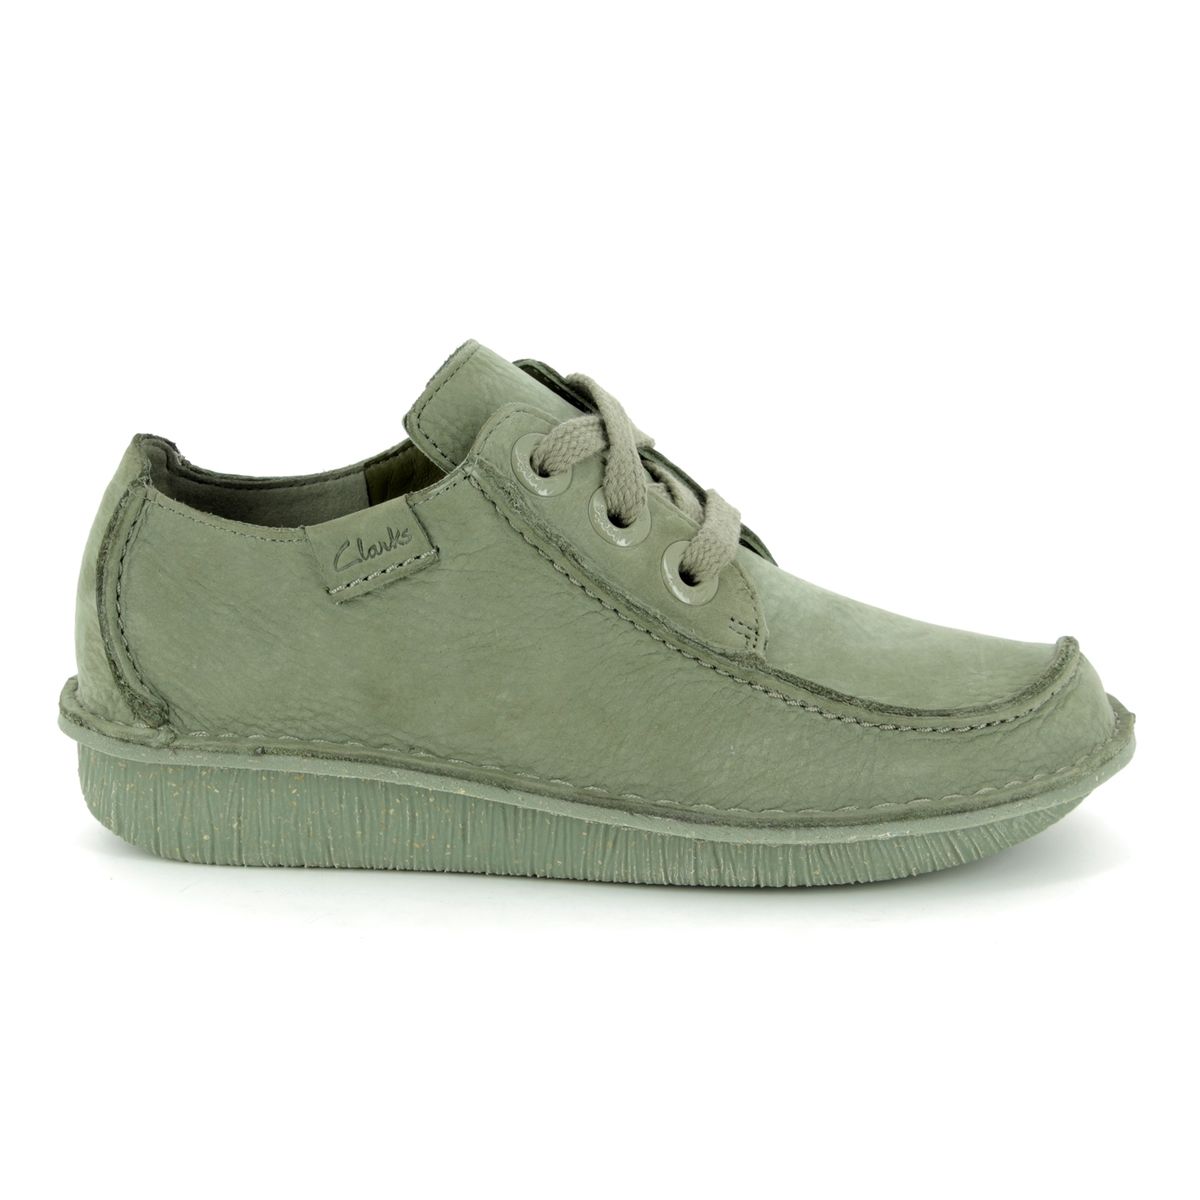 Clarks Funny Dream D Fit Sage green 